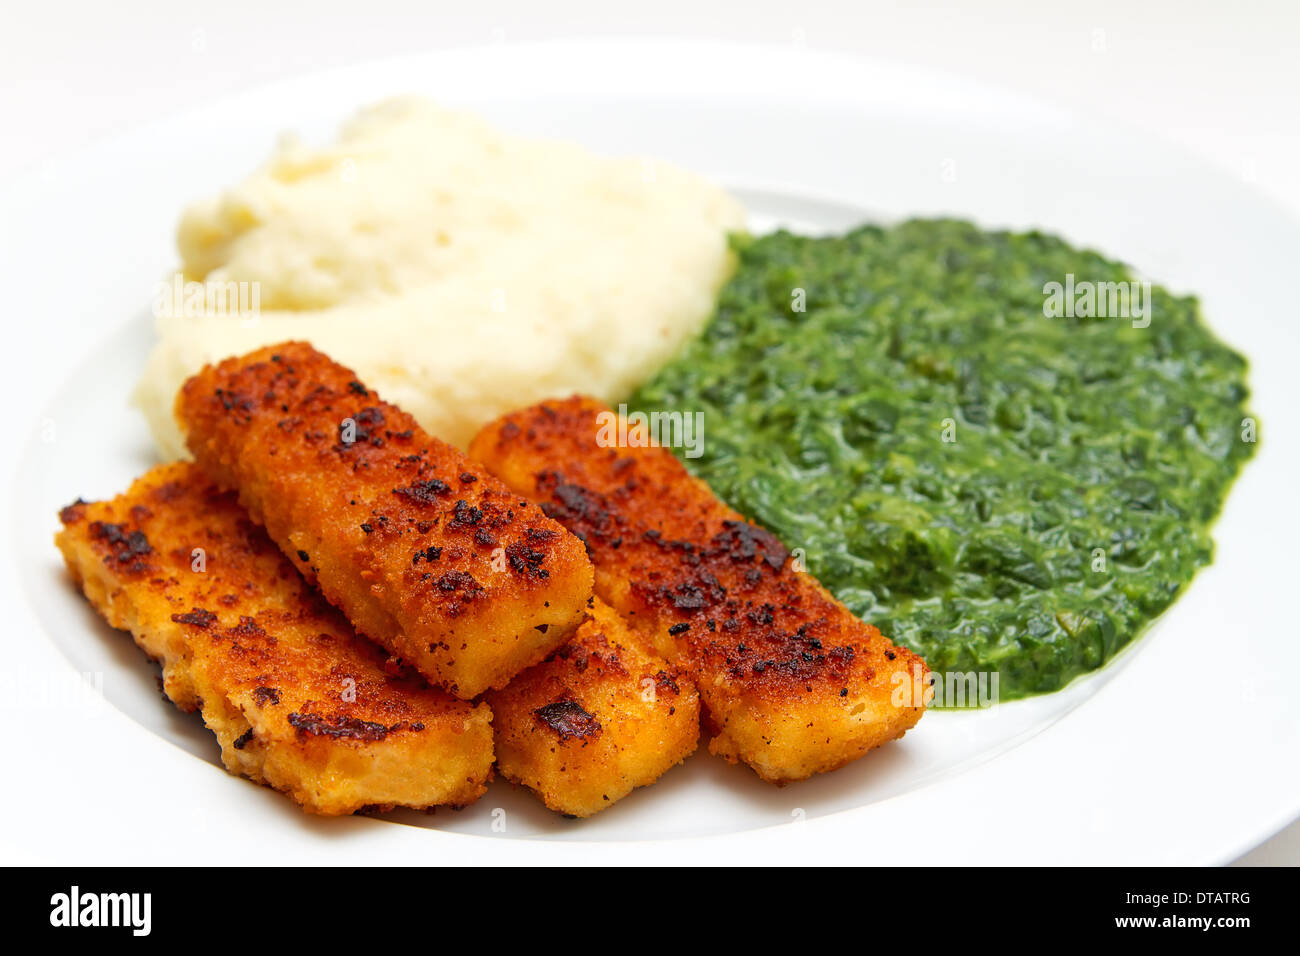 fried fish fillet with mashed potatoes and spinach Stock Photo